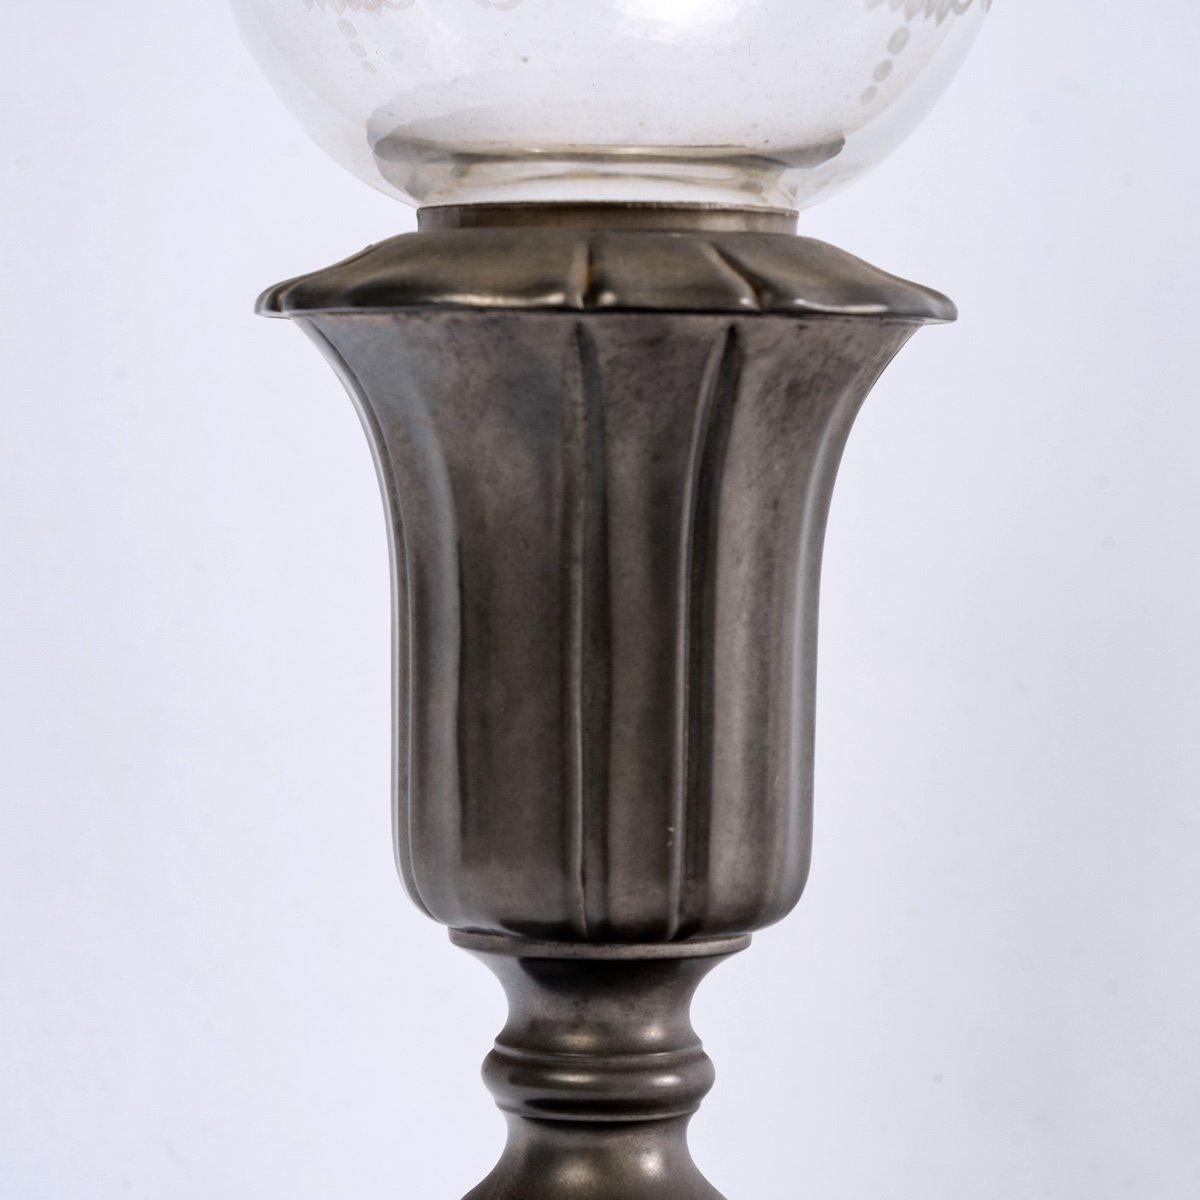 Tealight Candlestick Lamp - Baccarat Crystal And Pewter From The Manor - XX th For Sale 1